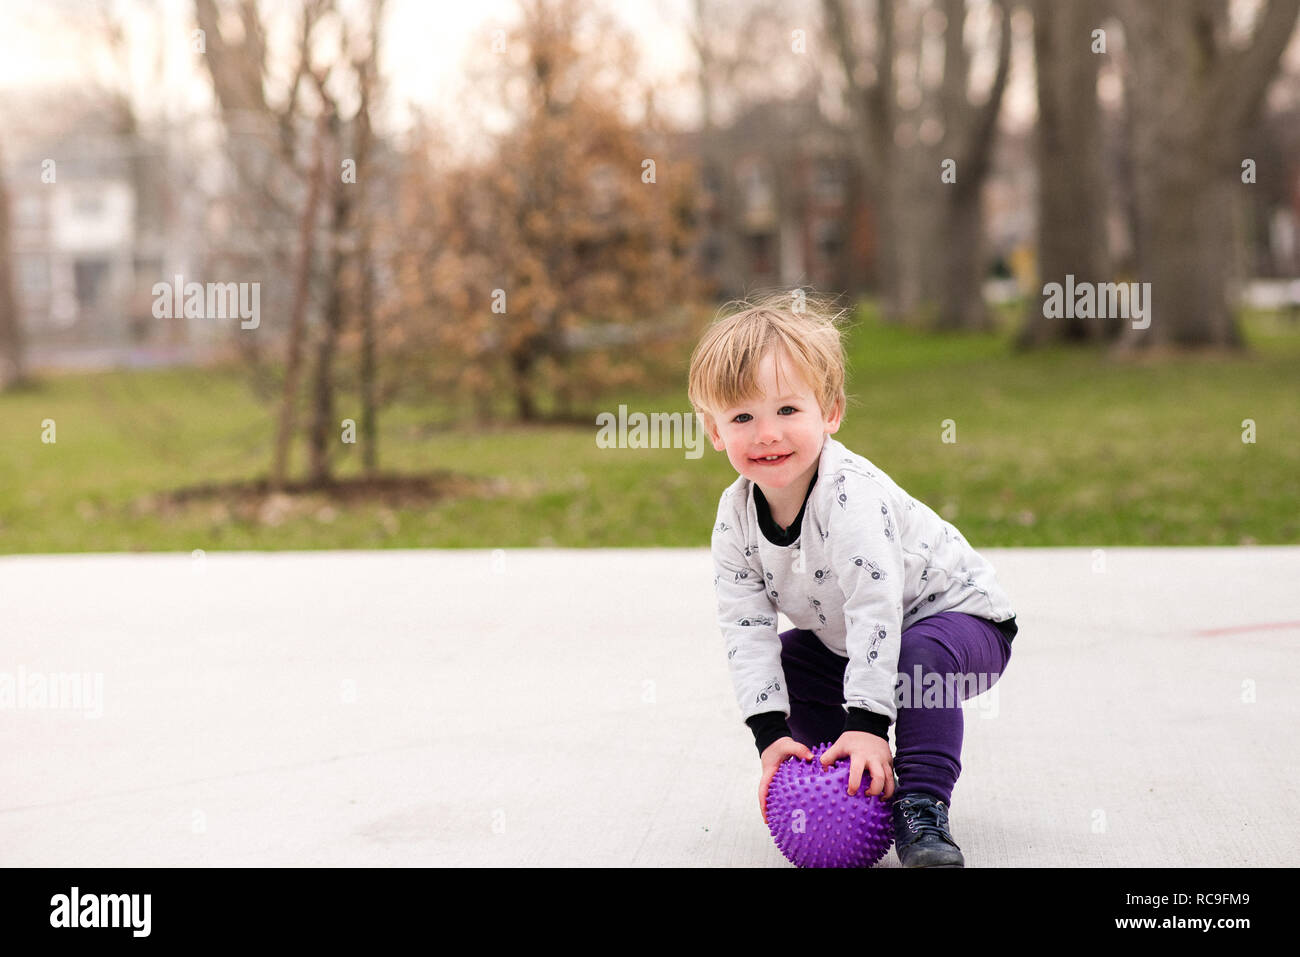 Boy playing ball in park Stock Photo